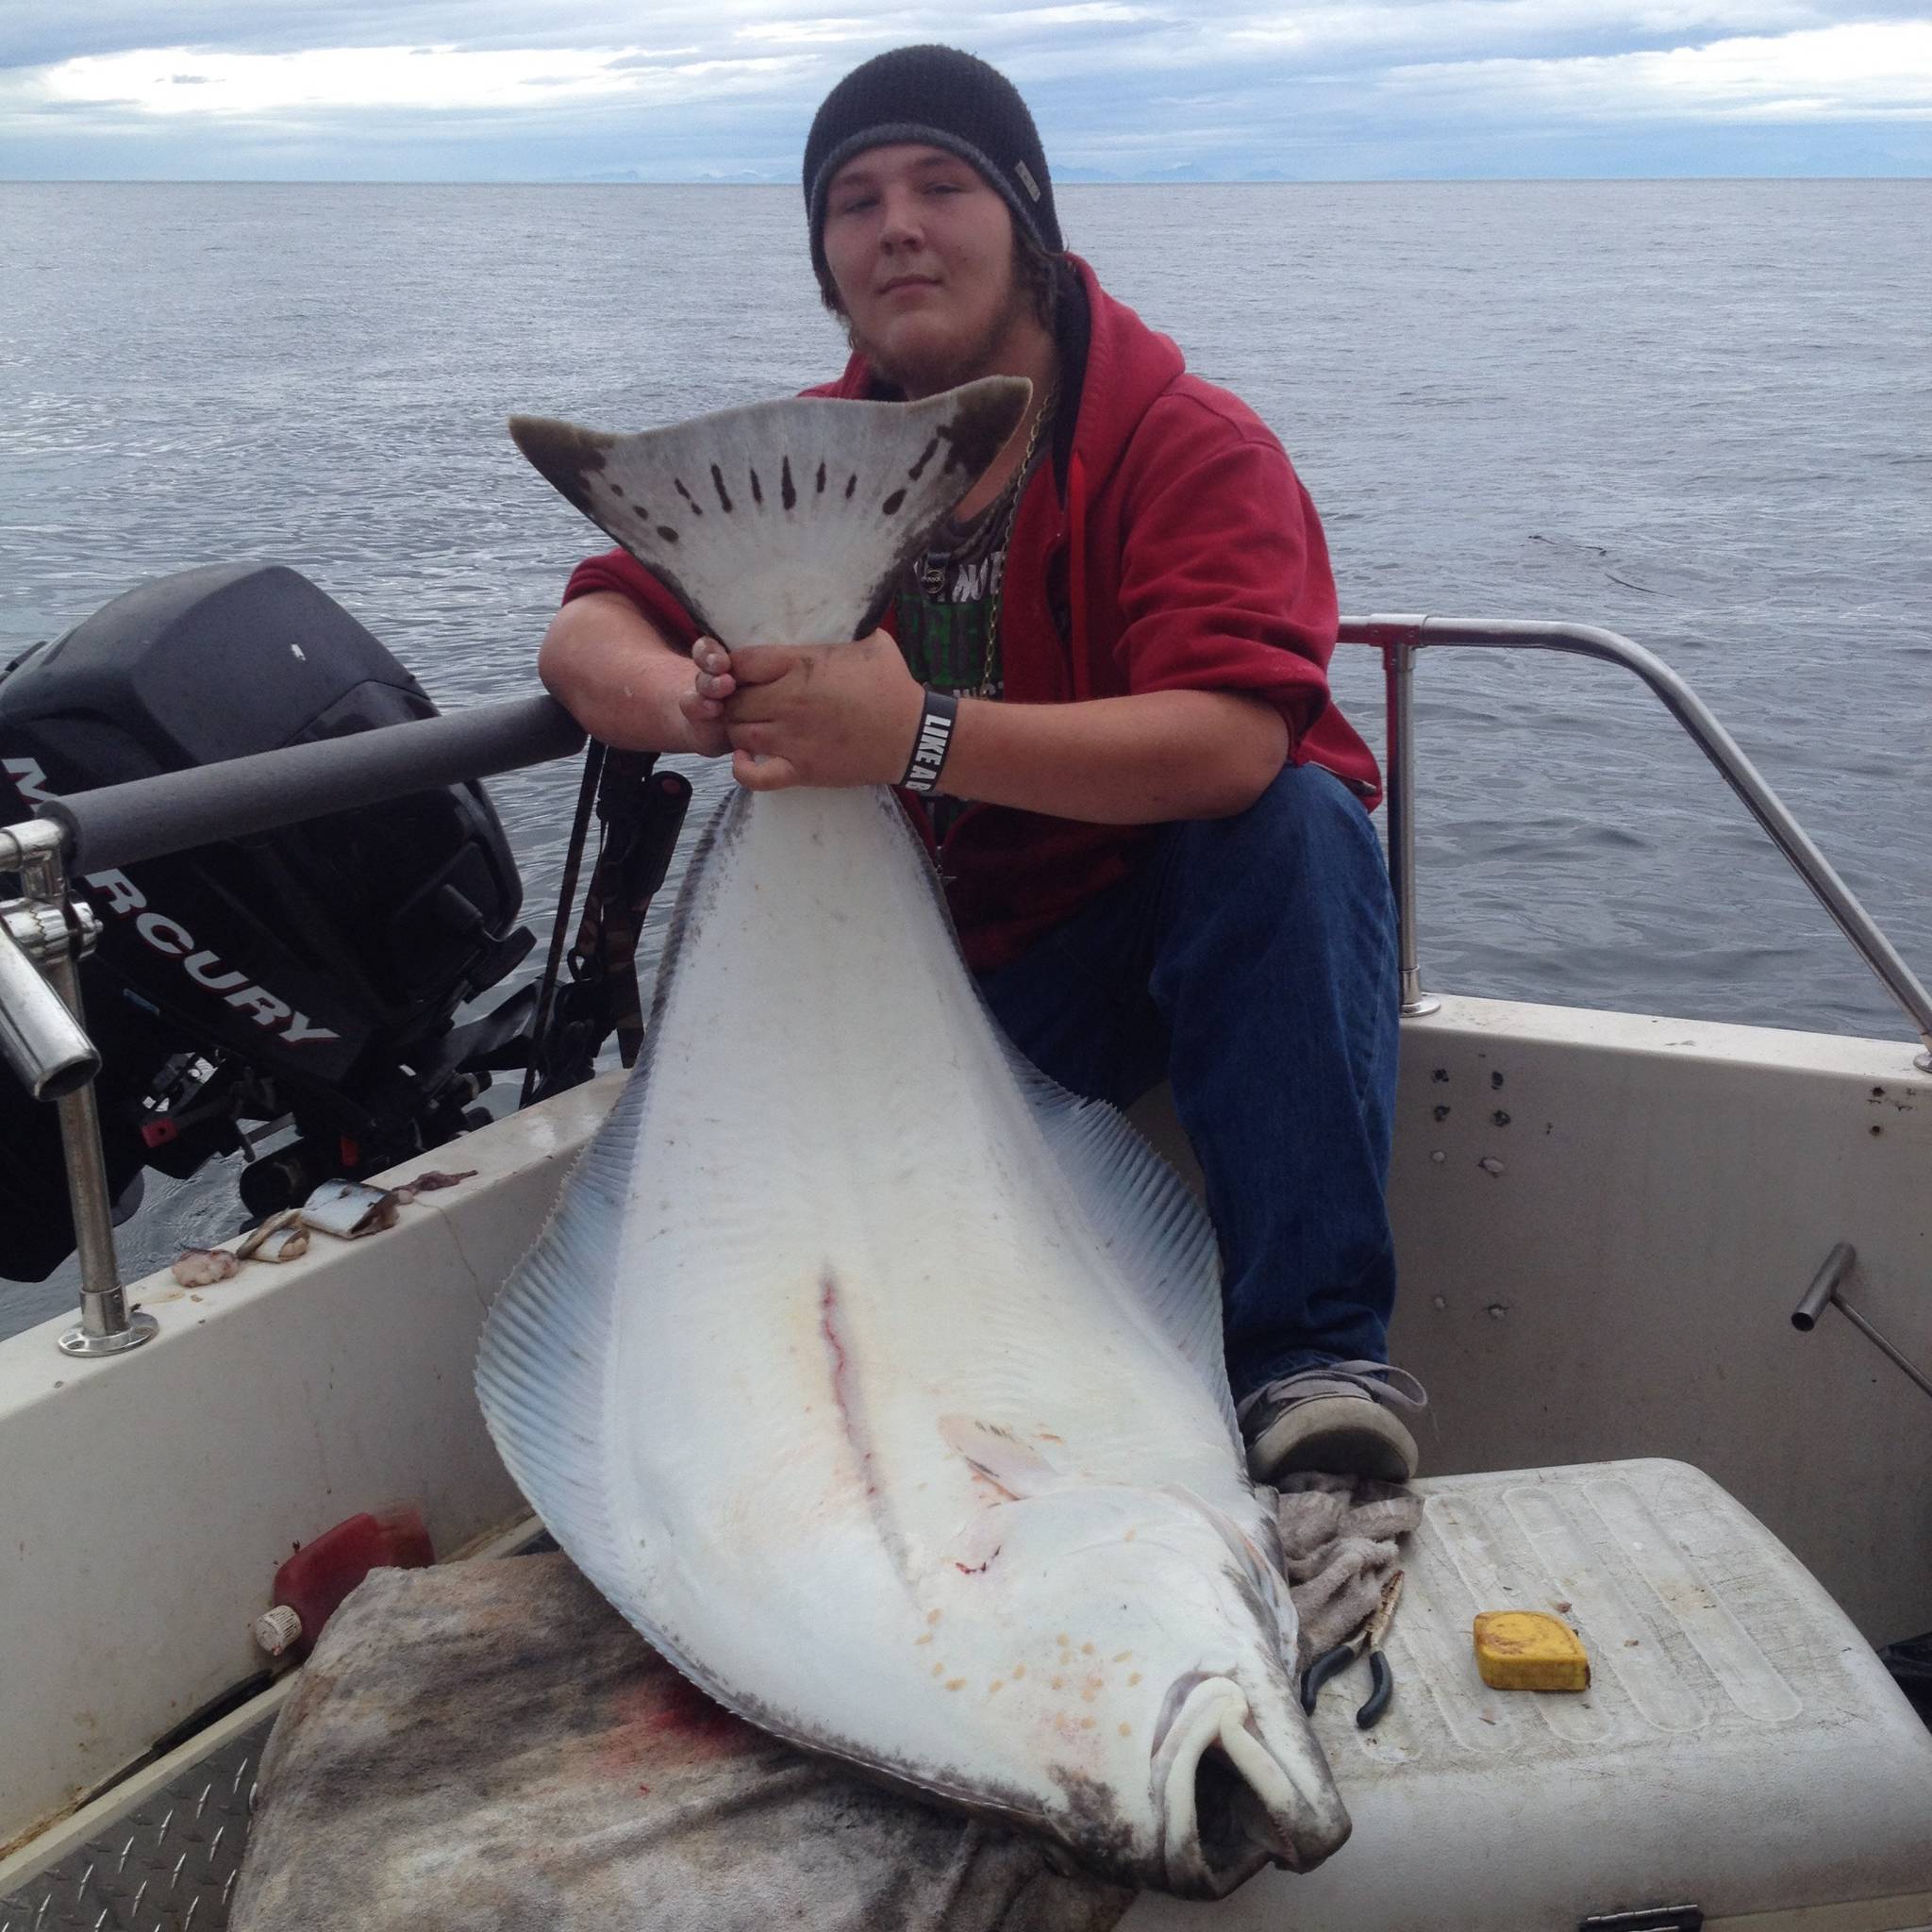 Jordan Goldthwaite, 15, caught this 75 pound halibut Monday, Aug. 7, 2017 while fishing out of Homer, Alaska on his fathers boat, Dad’s Dream. (Photo courtesy Frank Goldthwaite)